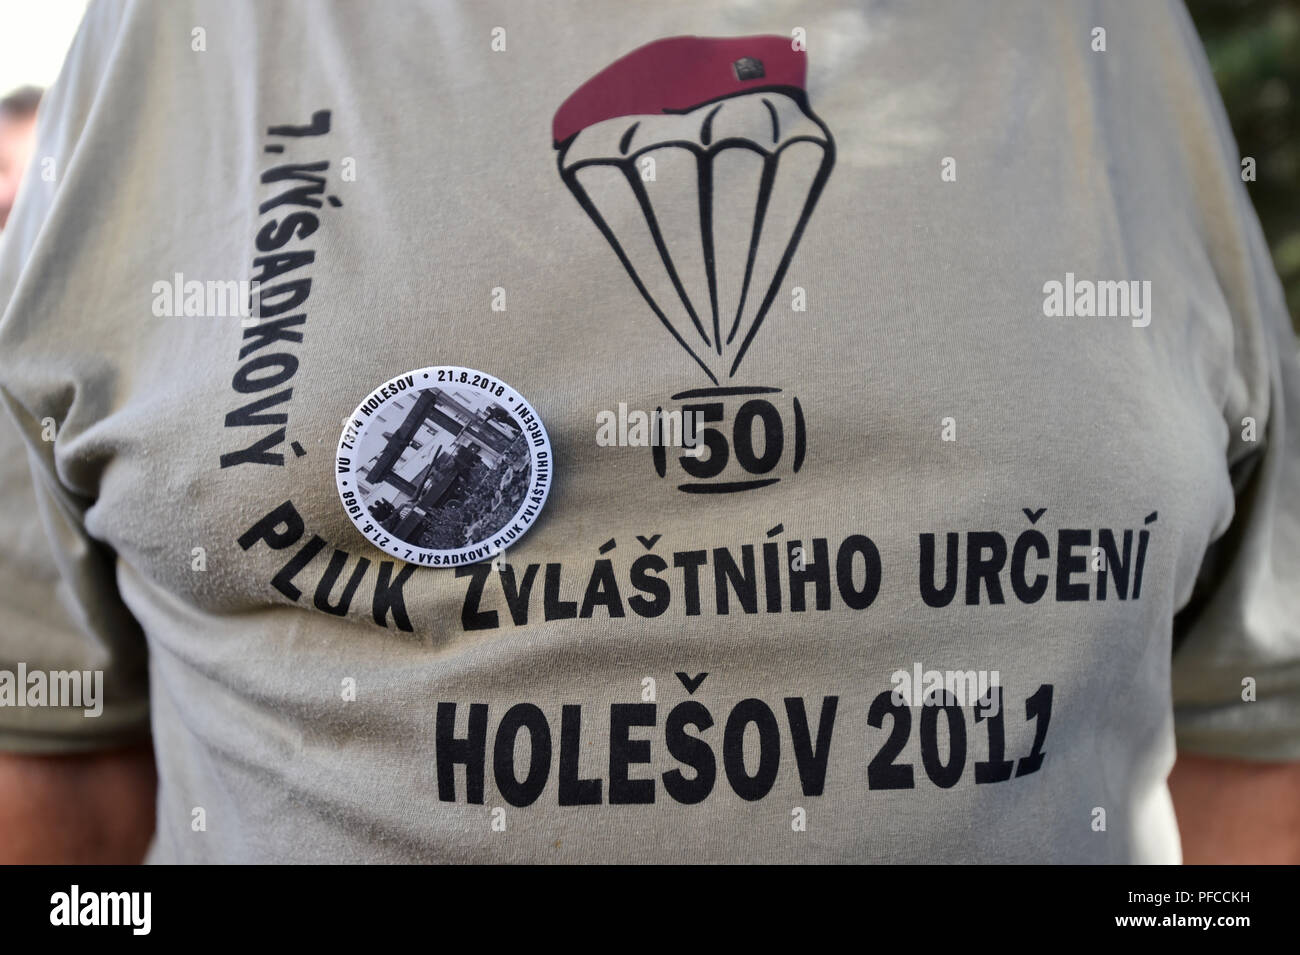 Holesov, Czech Republic. 21st Aug, 2018. A meeting of members of 7th Parachute Regiment of Special Purpose, who in August 1968 refused to hand over their barracks to soldiers of the Warsaw Pact - Soviet Guardian Tank Battalion, took place in Holesov, Czech Republic, on August 21, 2018. It was a very rare act at the time. On the photo is seen a button and t-shirt with sign reads '7th Parachute Regiment of Special Purpose'. Credit: Dalibor Gluck/CTK Photo/Alamy Live News Stock Photo